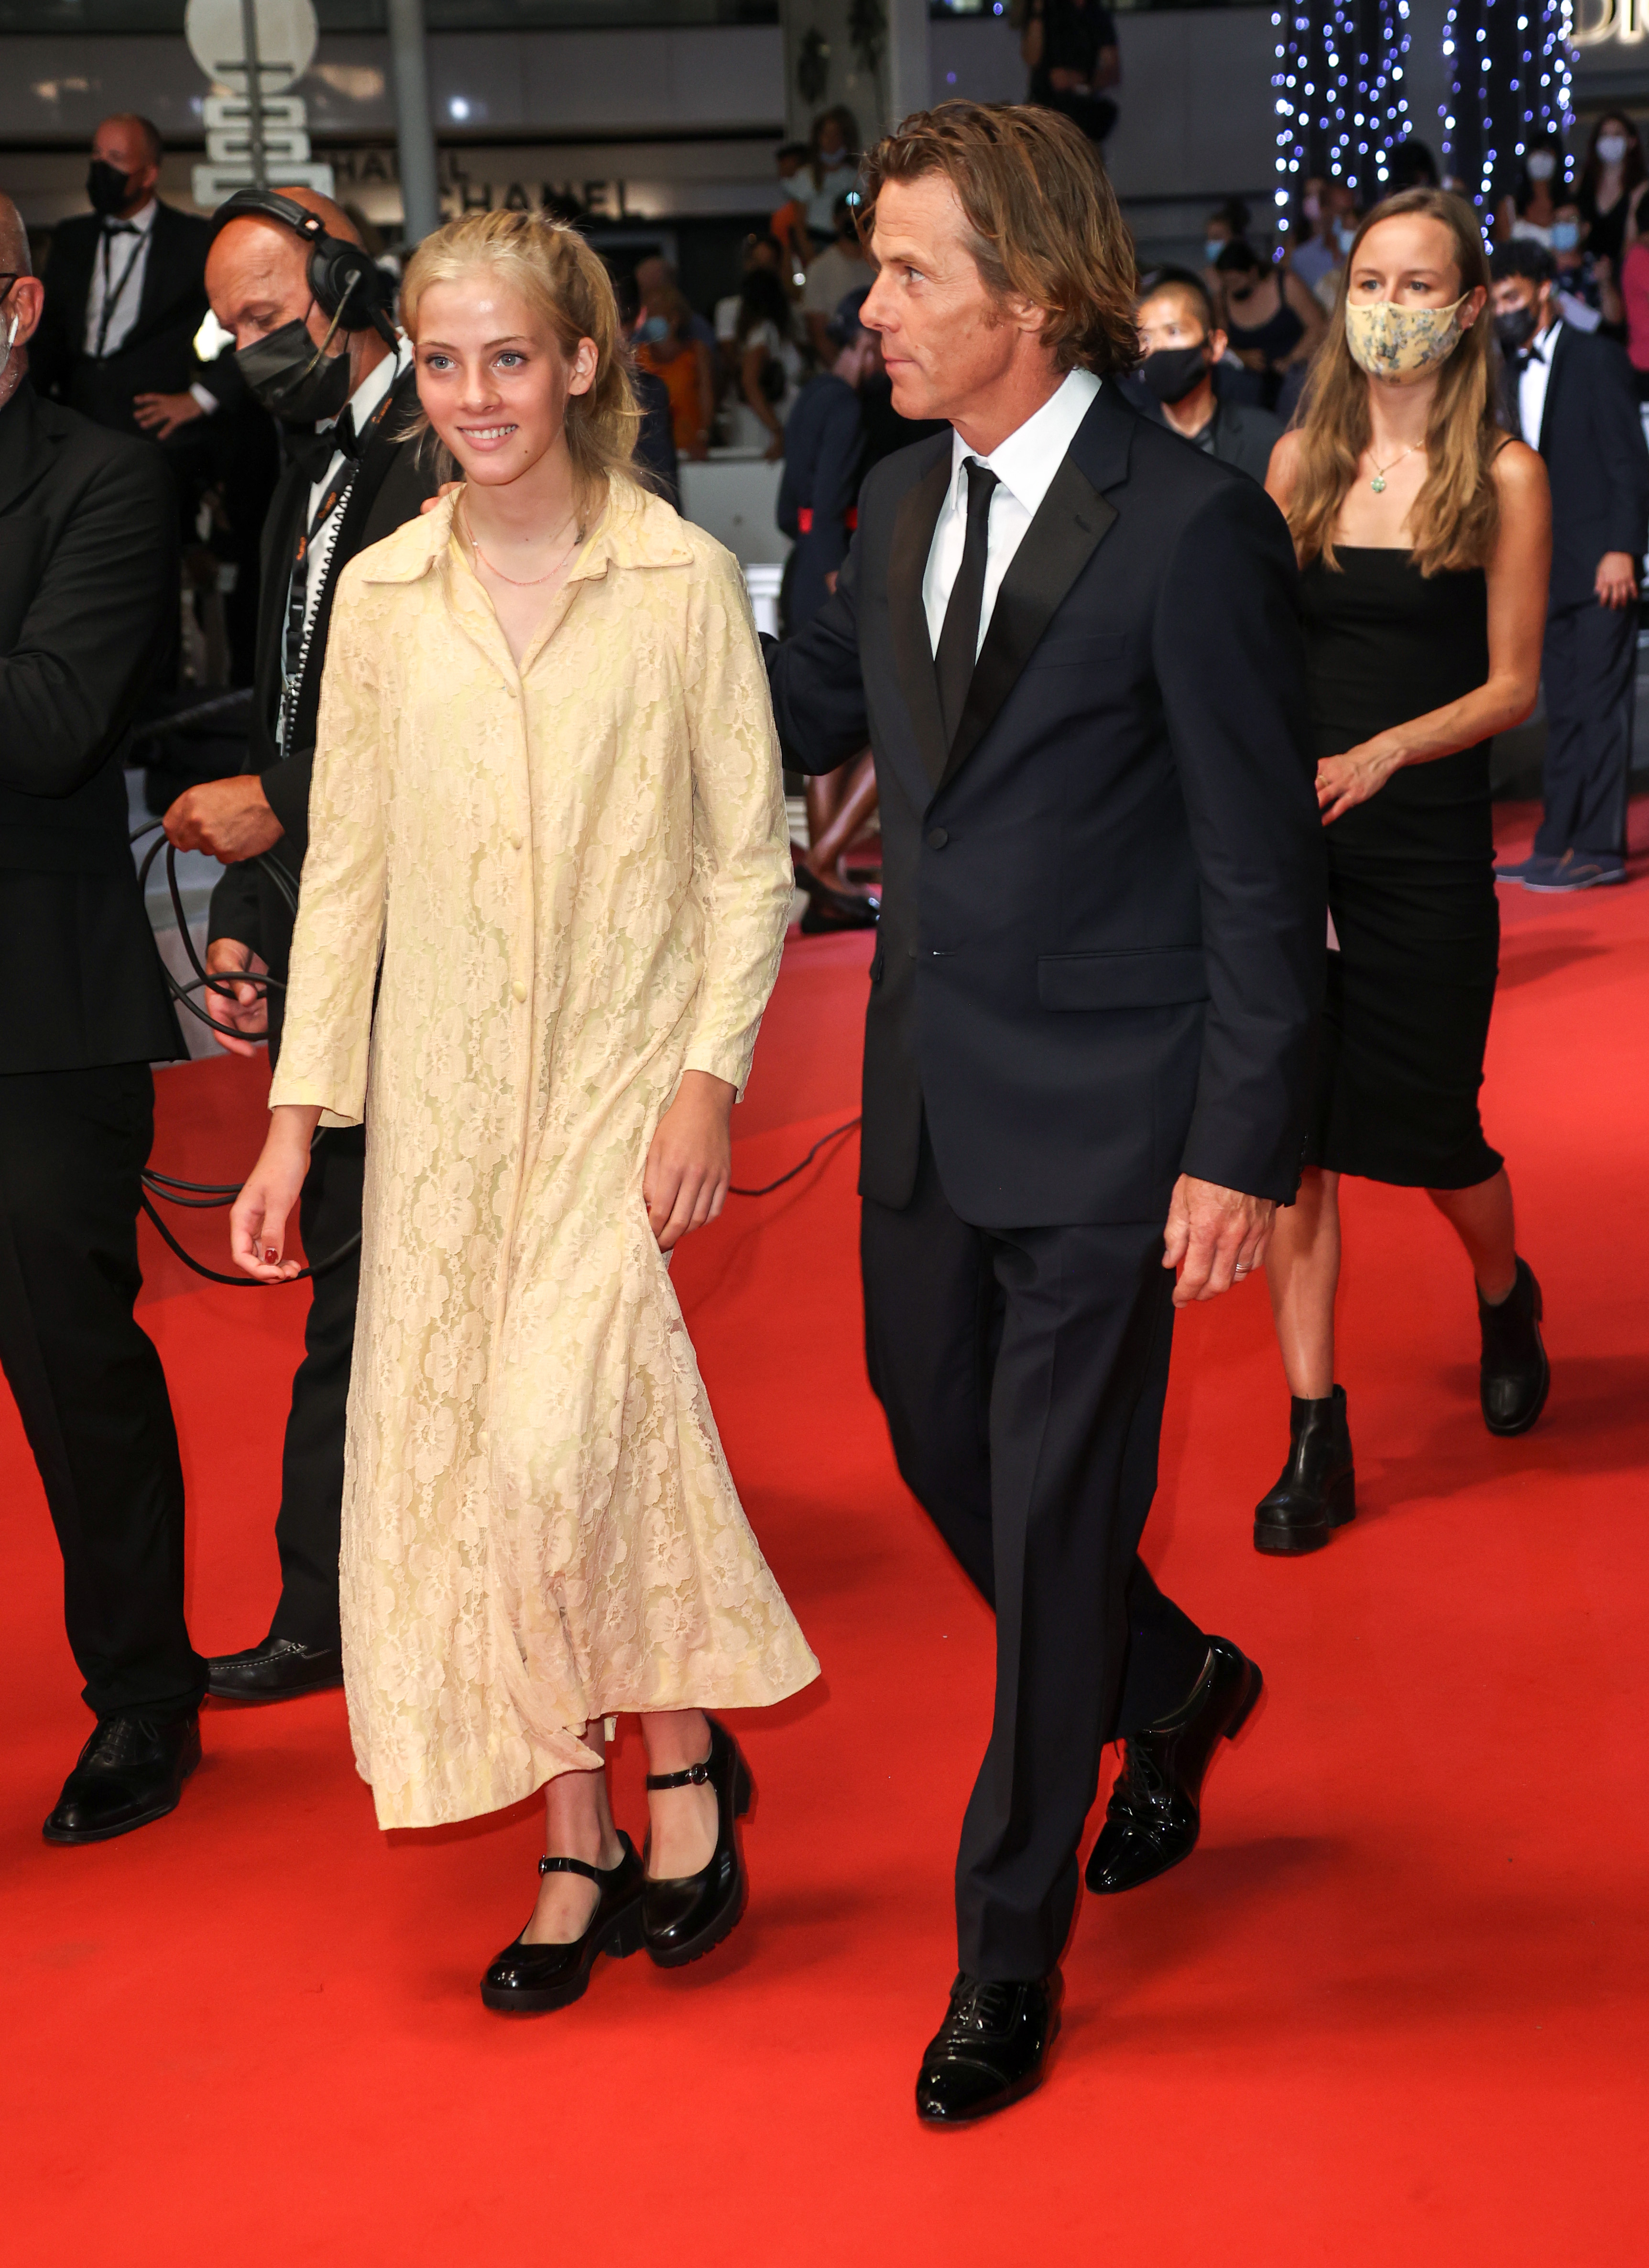 Hazel and Daniel Moder at the 74th Annual Cannes Film Festival on July 10, 2021 | Source: Getty Images